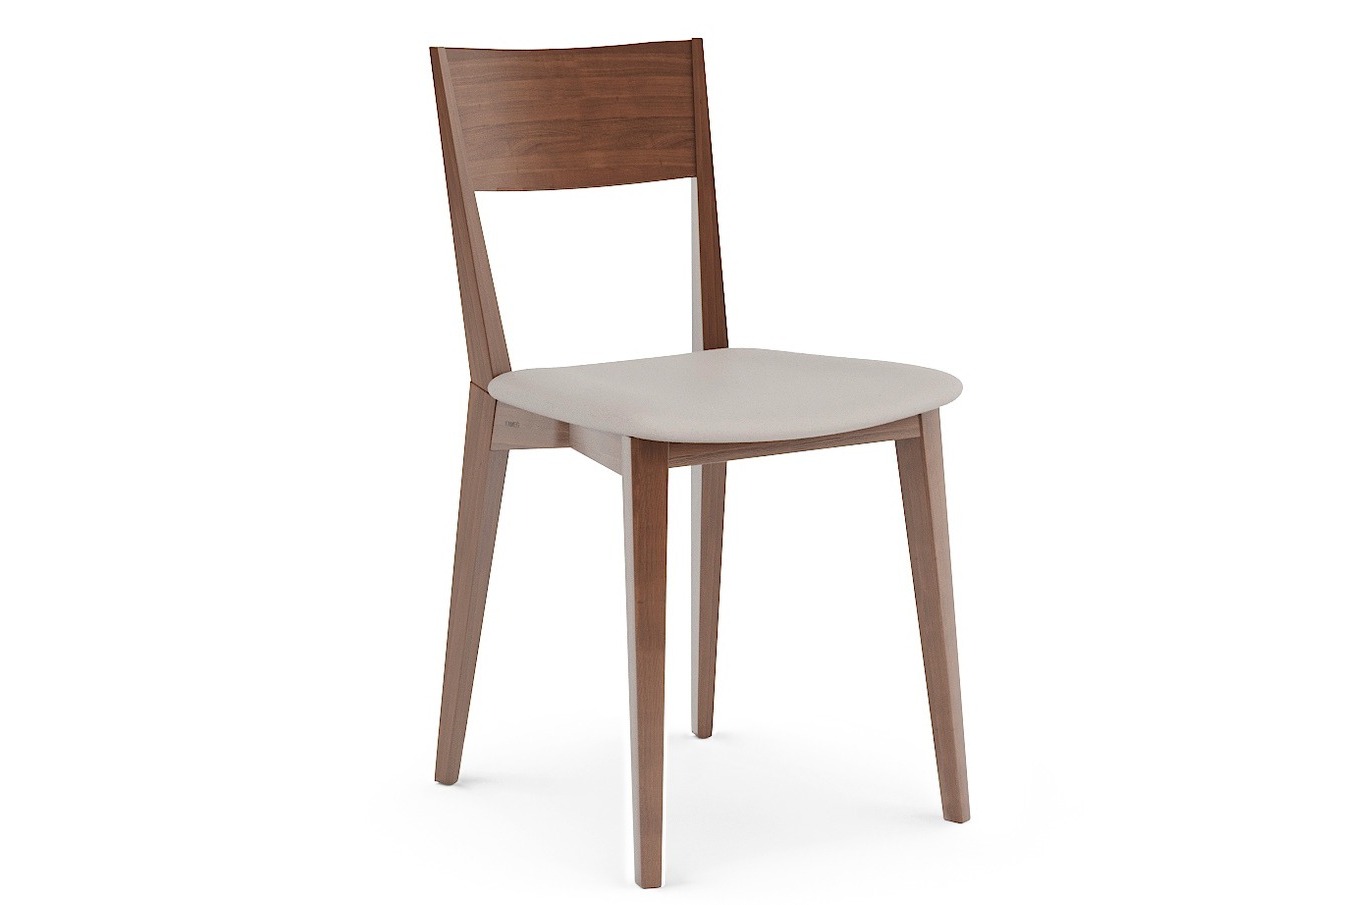 Orson Leather Seat Dining Chair